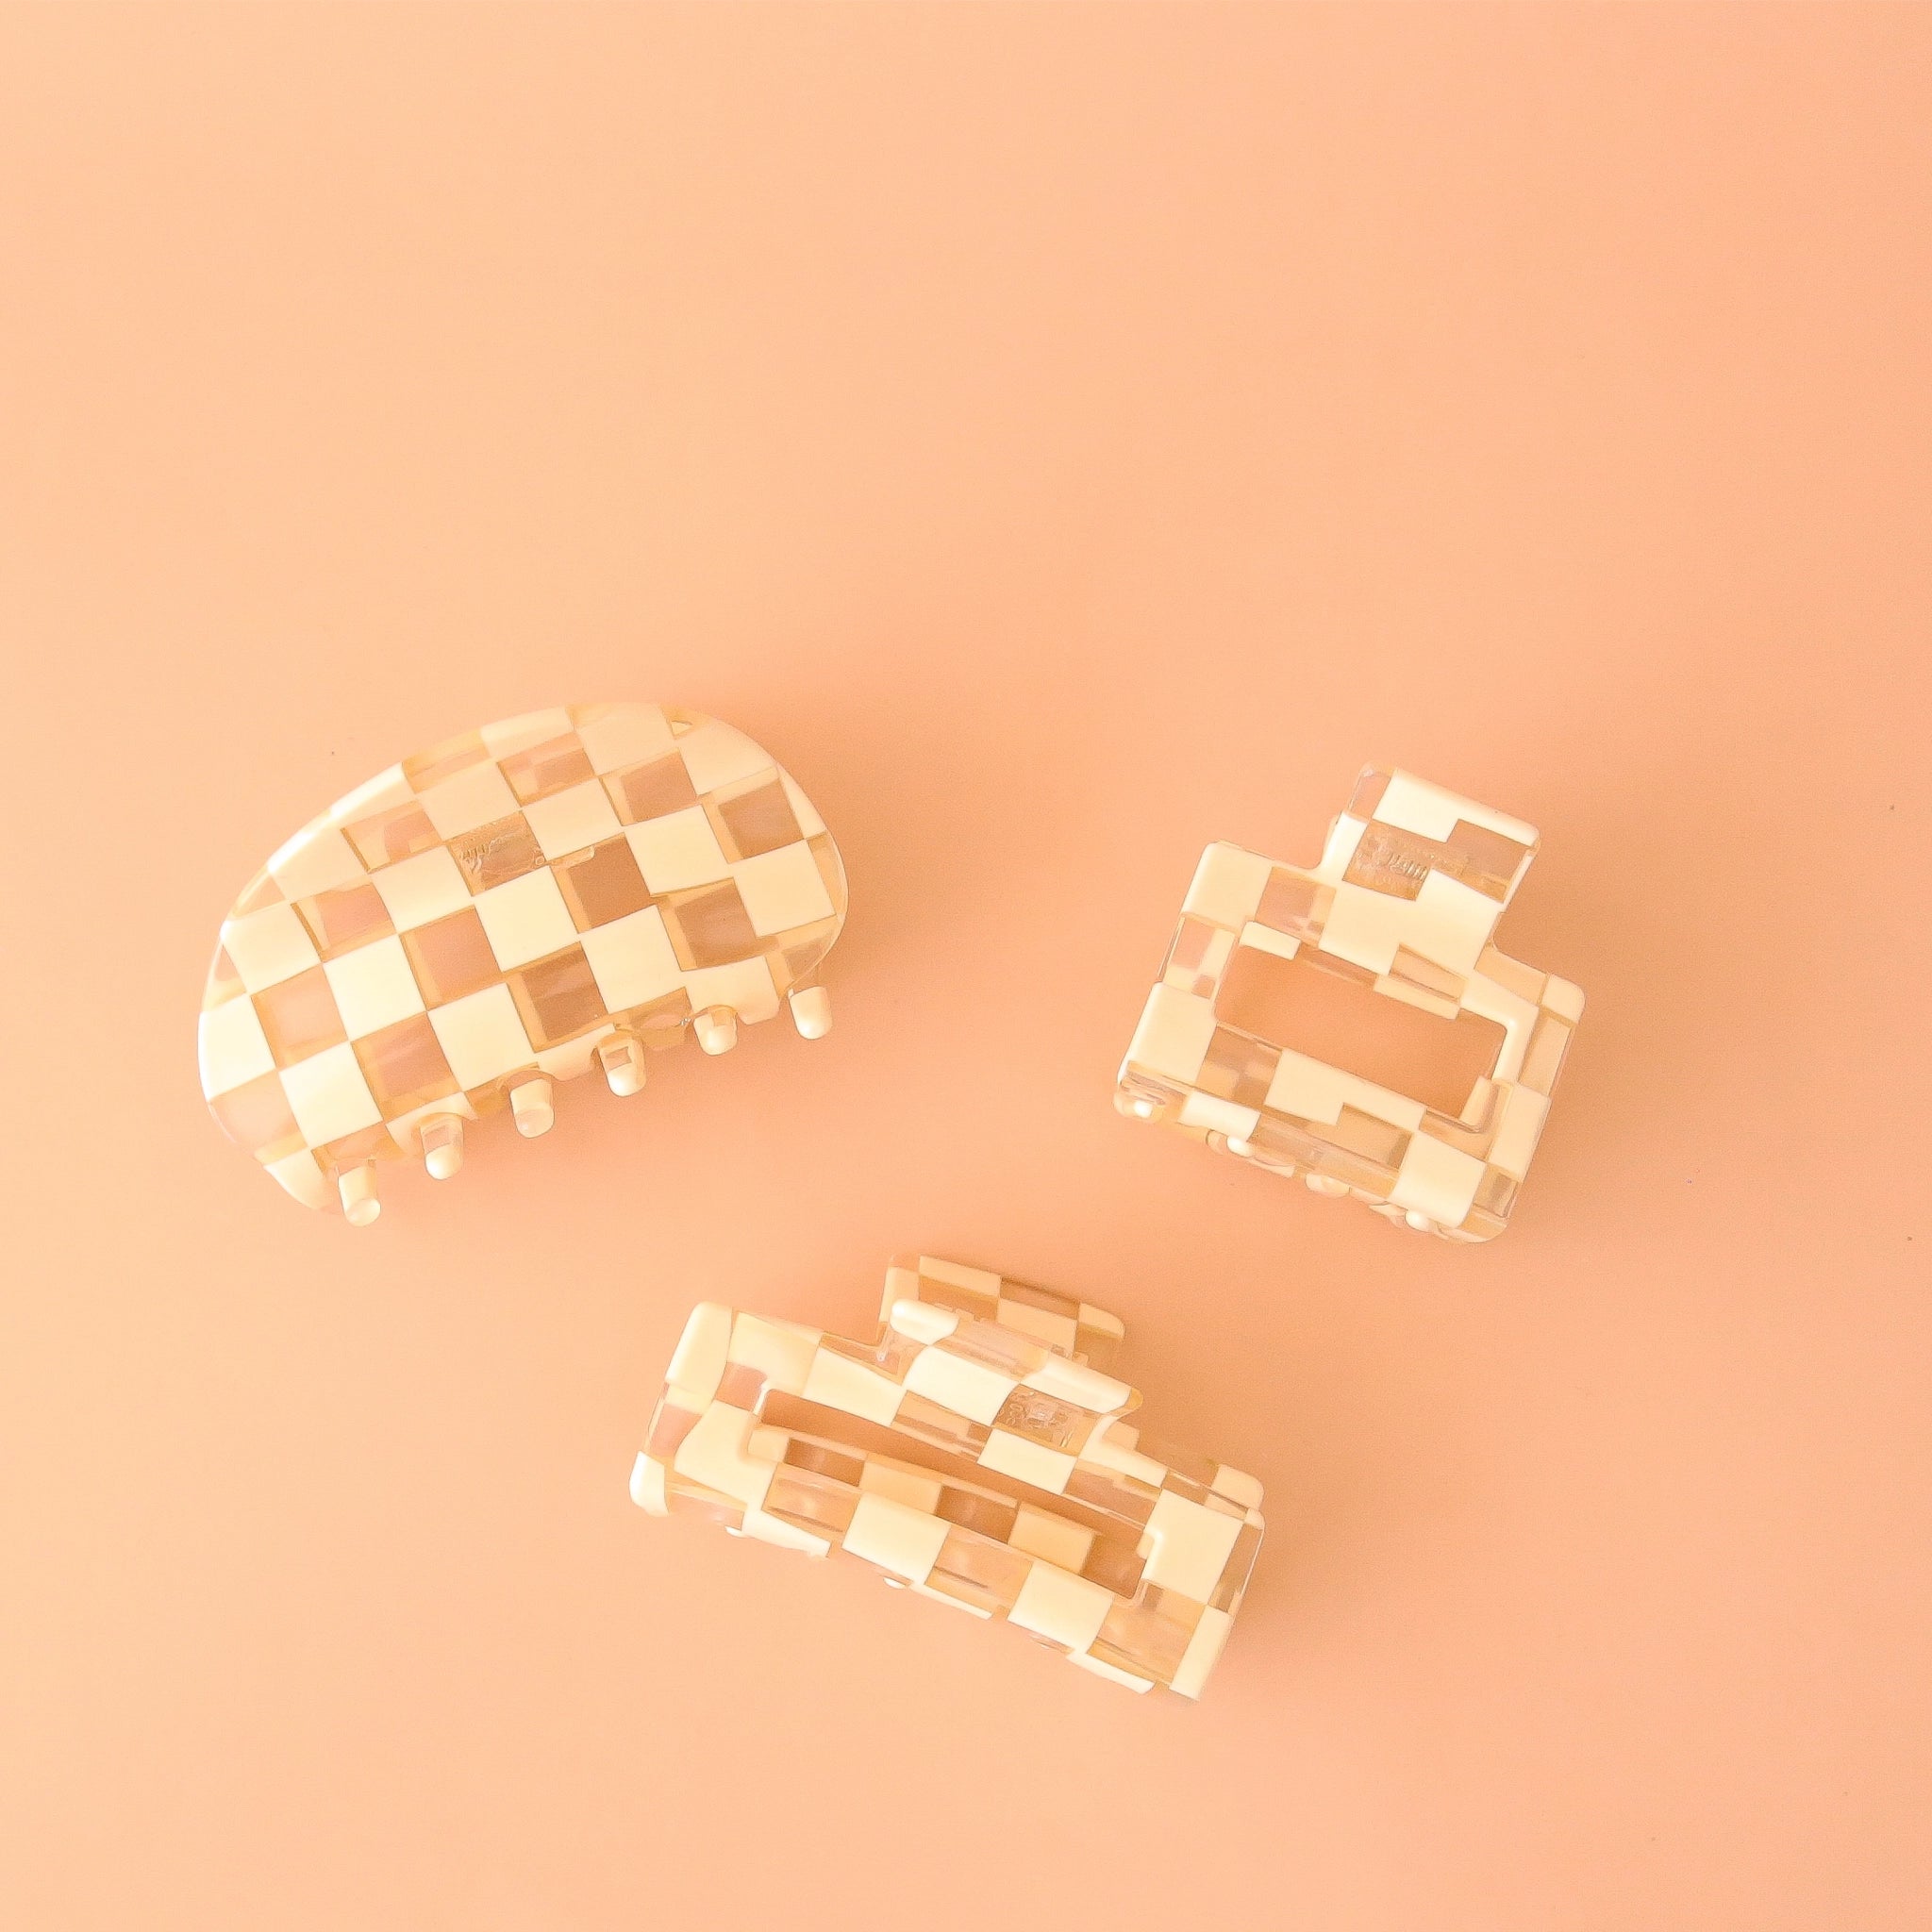 On a peachy background is three different shaped claw clips with a white and clear checker print. One clips is a slightly smaller square shape, the other is a rectangular shape and the third has a rounded edge.